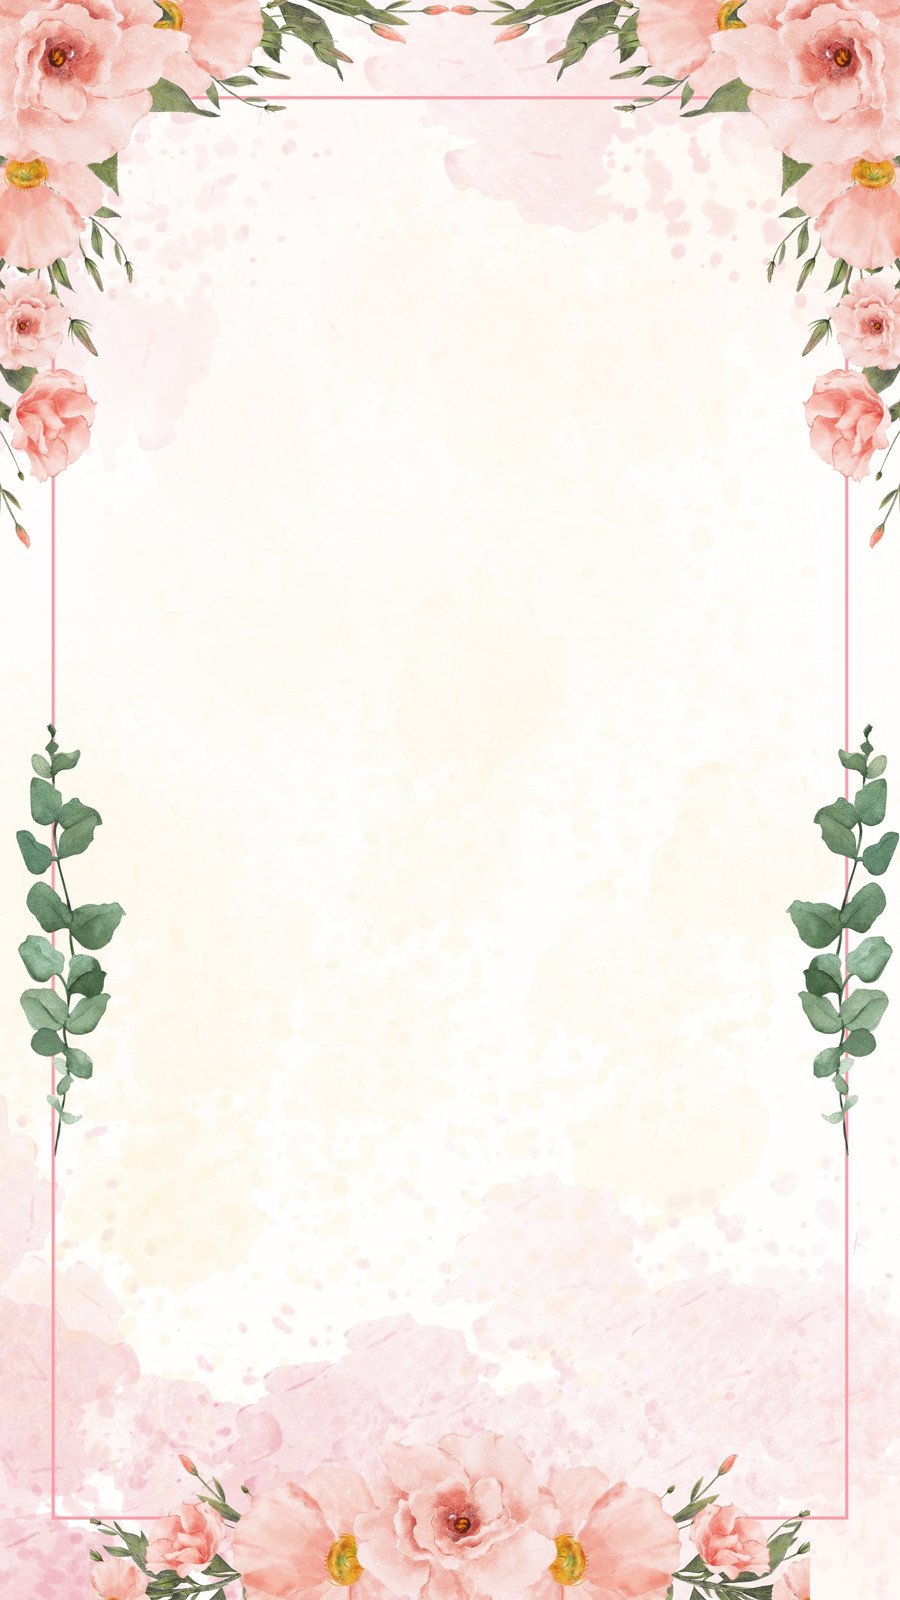 Free and customizable floral background templates